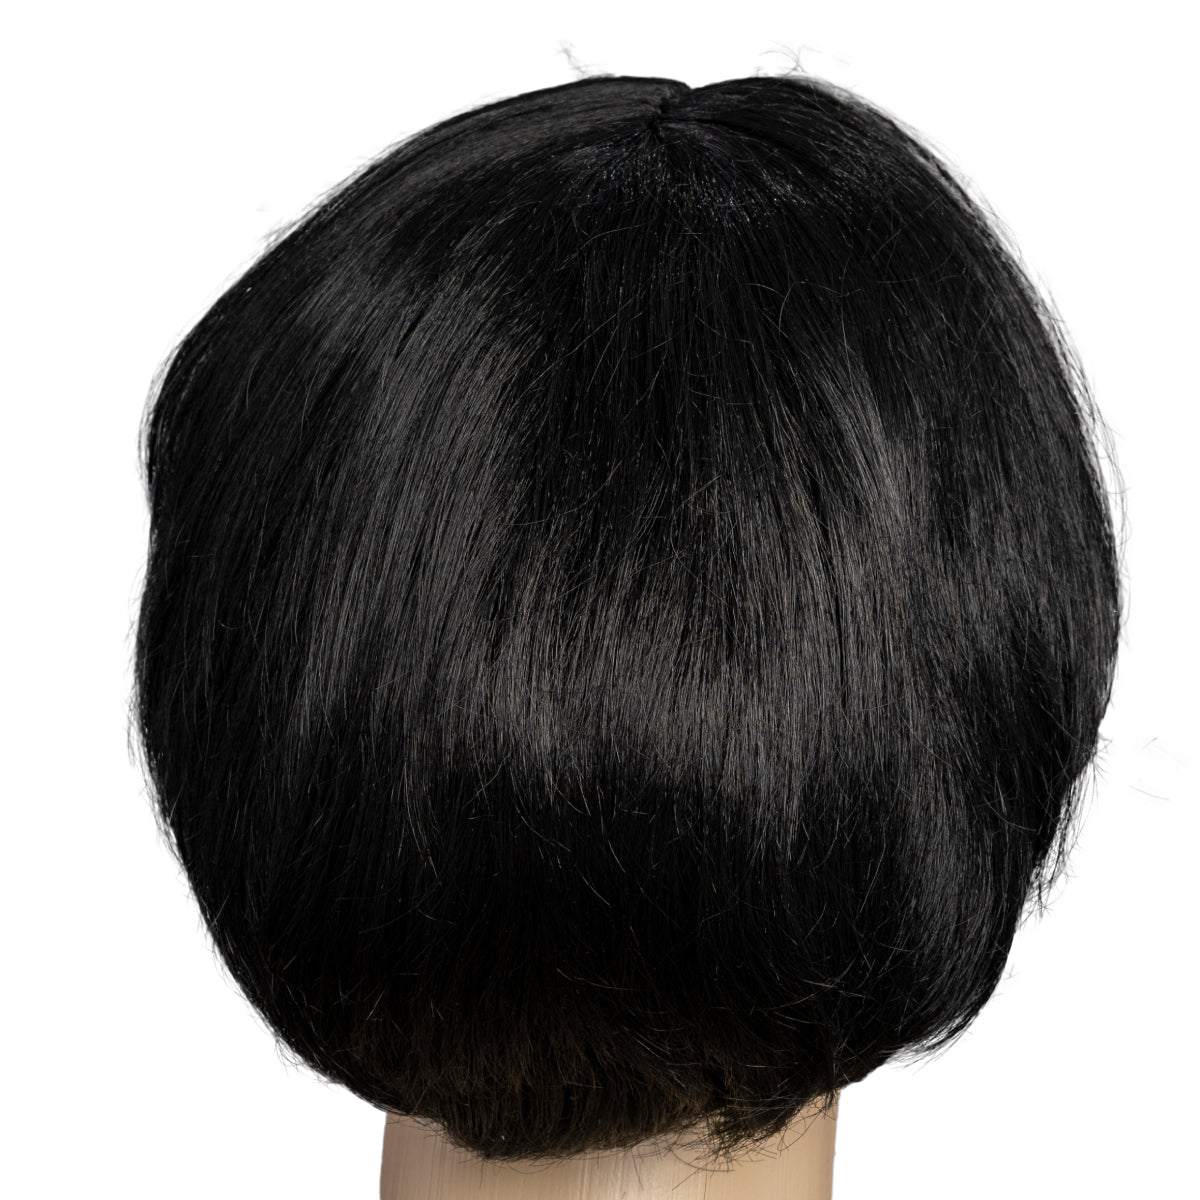 Gomez Adams Family Wig, Mustache, and Eyebrow Set for Halloween Costume Accessory and Cosplay Back View